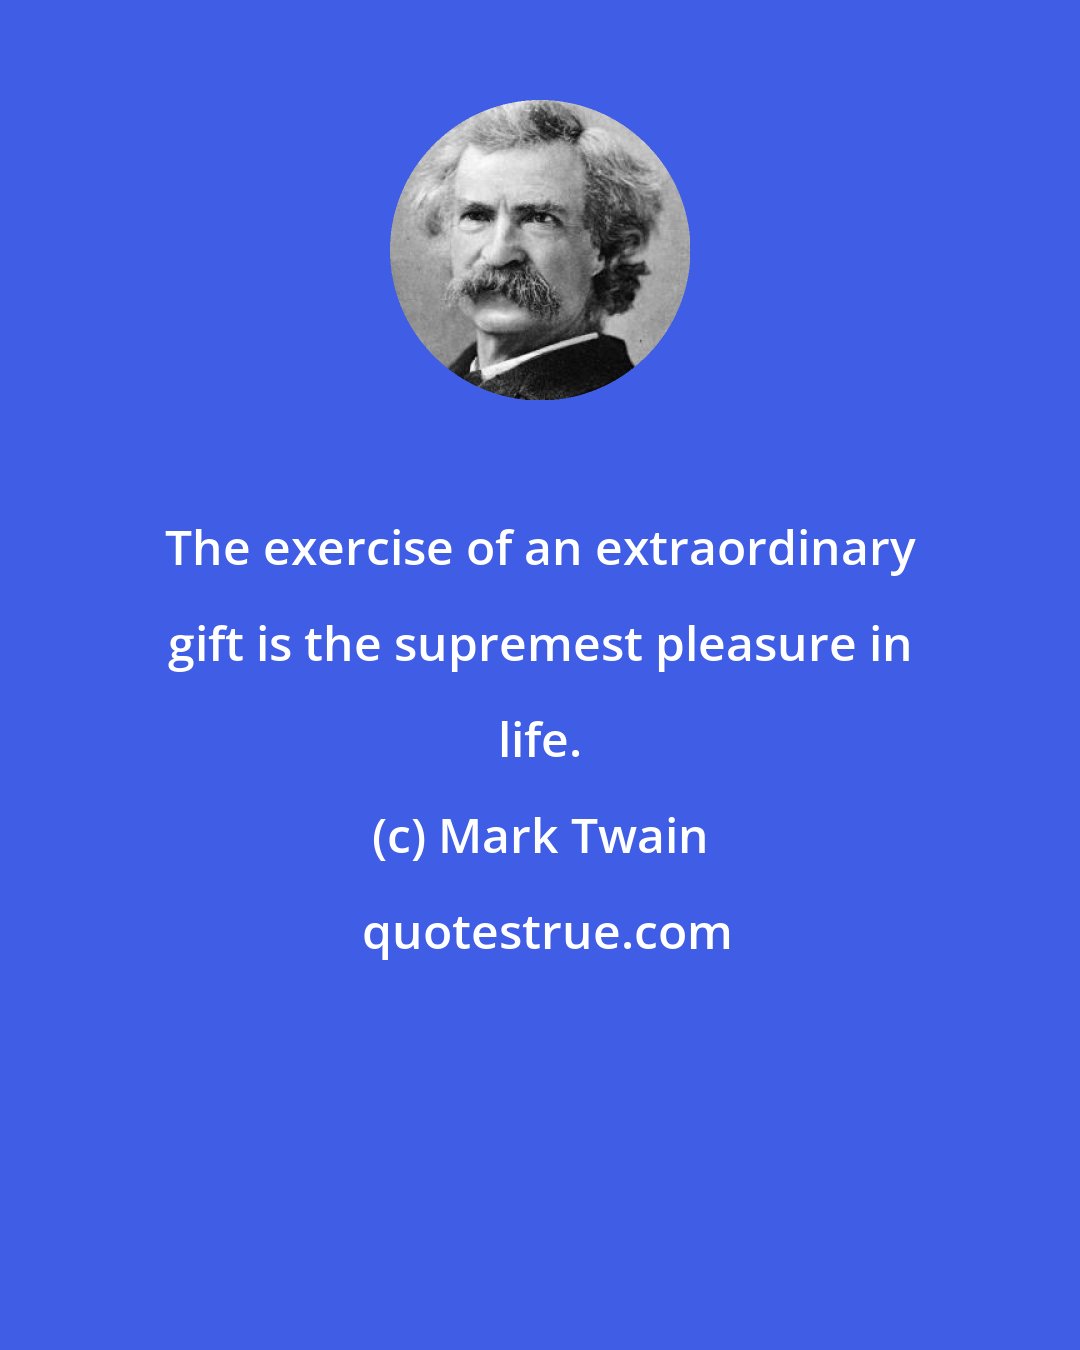 Mark Twain: The exercise of an extraordinary gift is the supremest pleasure in life.